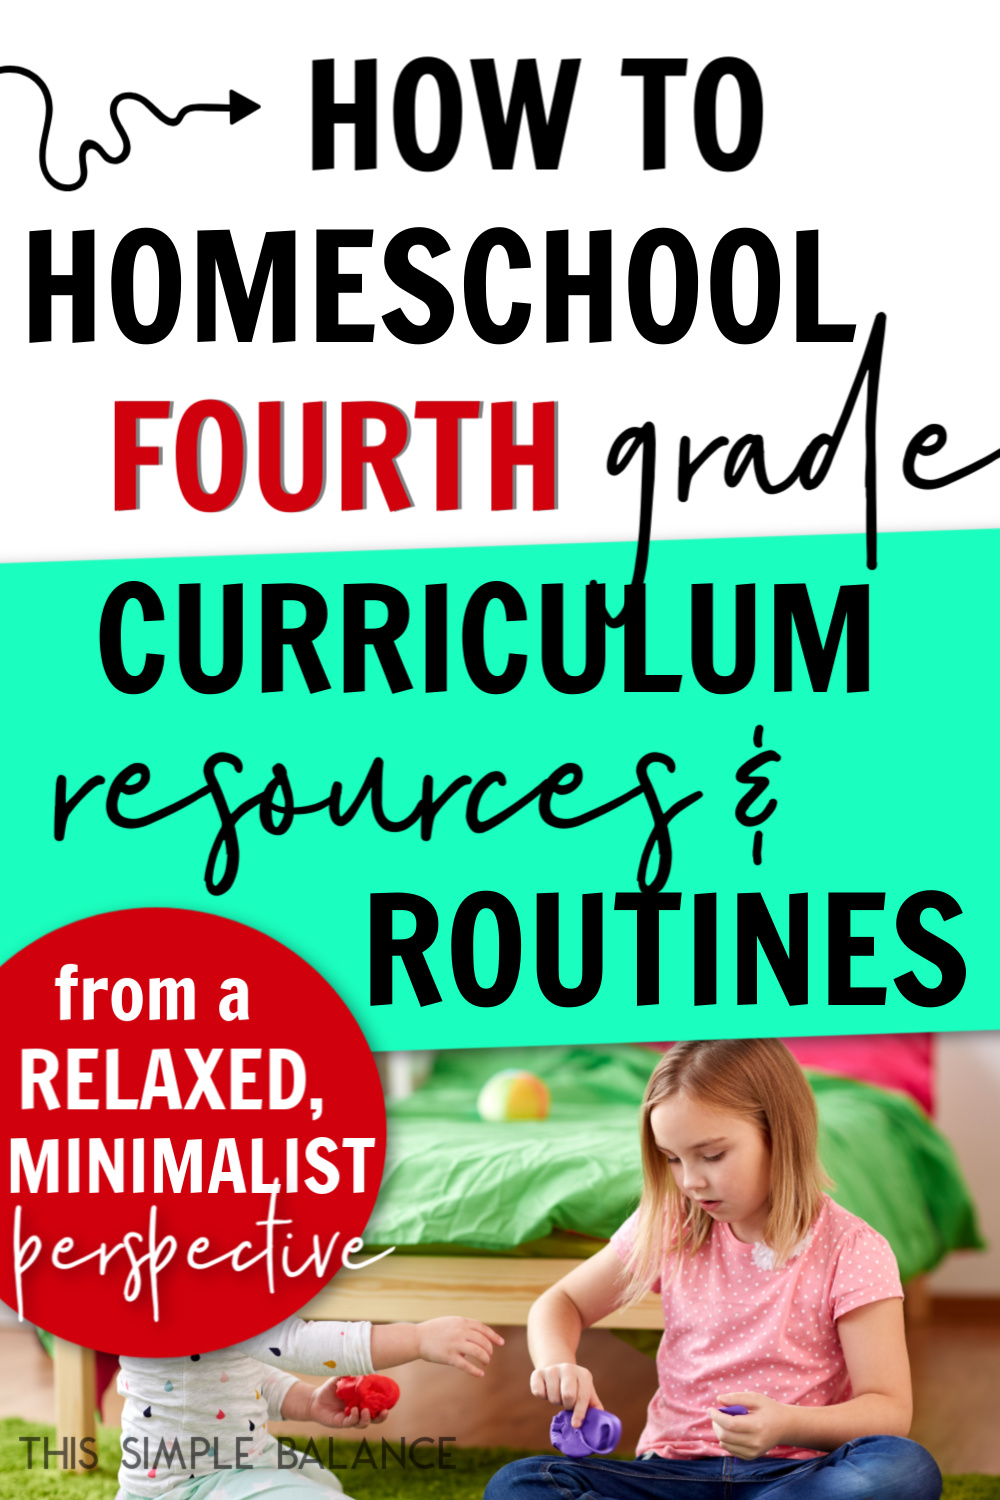 homeschooled fourth grade girl playing with slime with her younger sister, with text overlay, "how to homeschool fourth grade - curriculum, resources & routines from a relaxed, minimalist homeschool perspective"